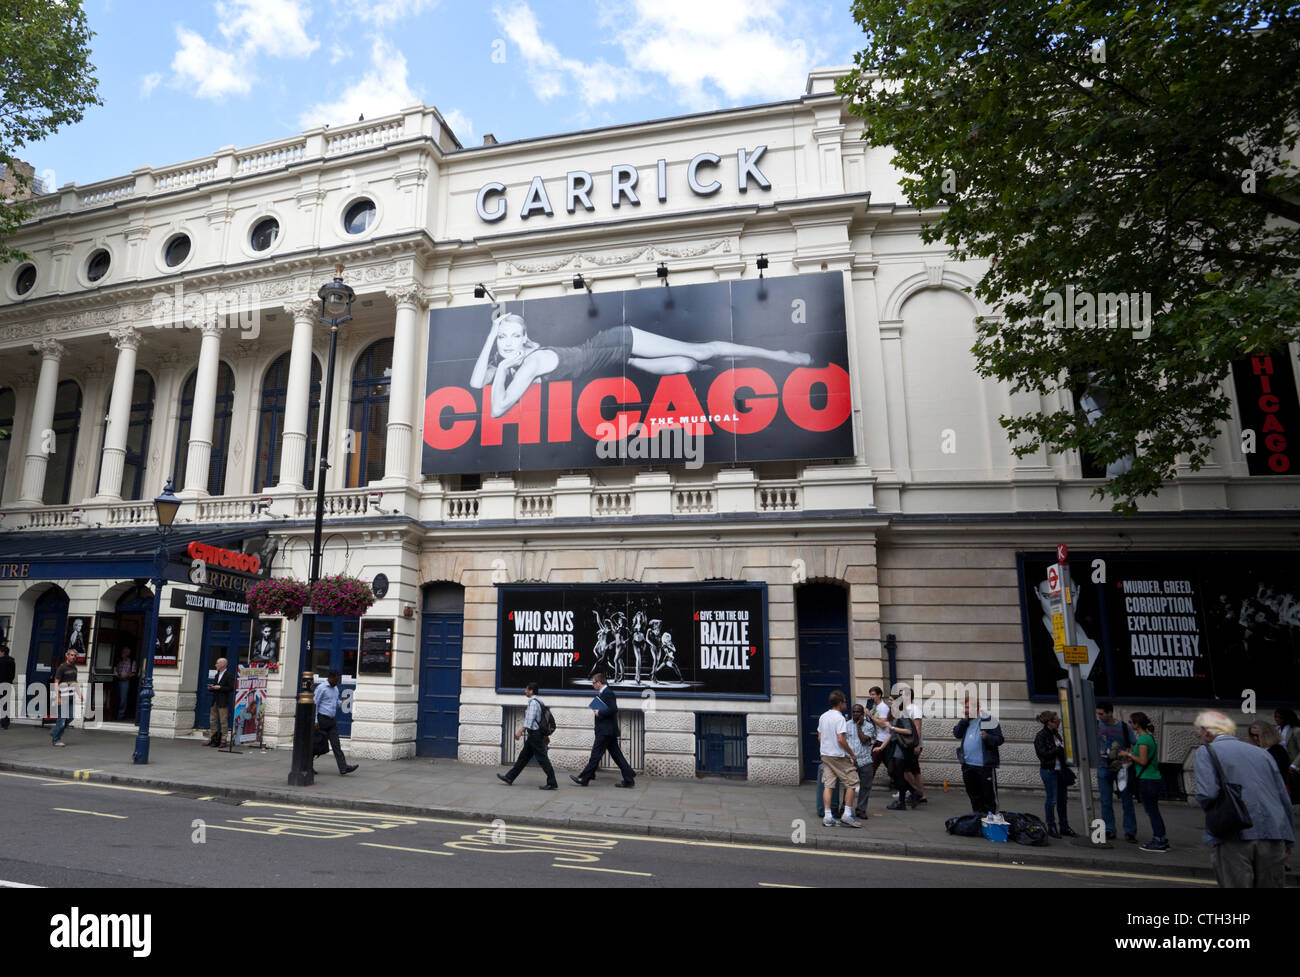 A billboard of Chicago the Musical at The Garrick Theatre, Charing Cross Road, City of Westminster, London, WC2, England, UK. Stock Photo